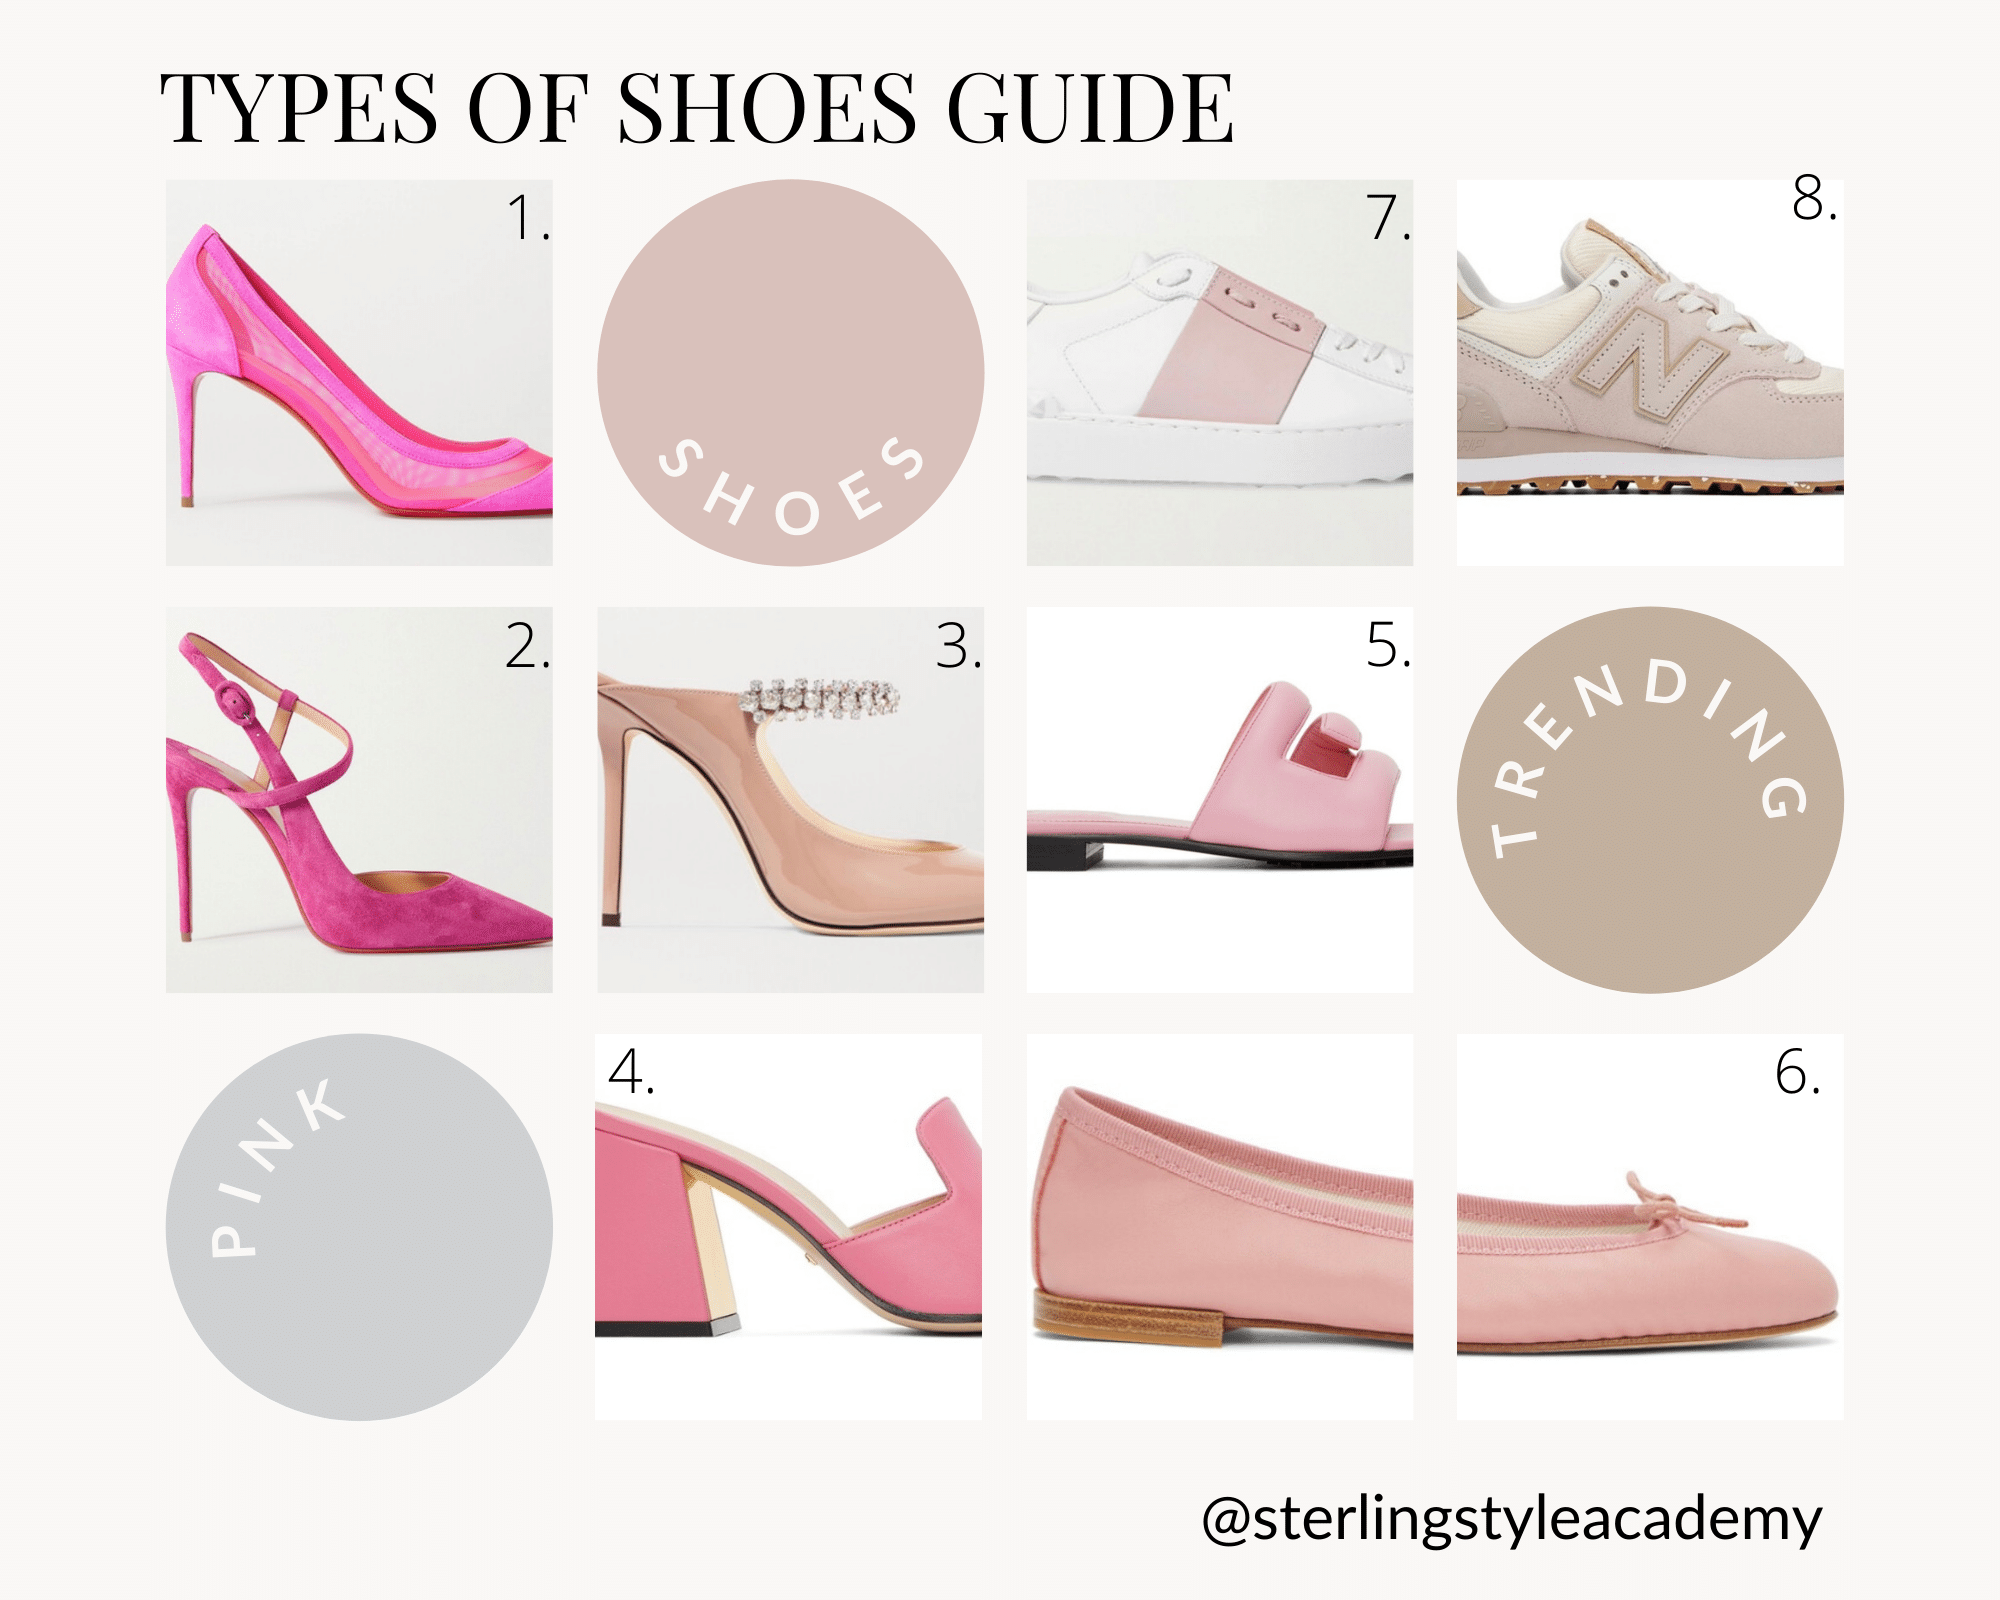 8 Foundational Types of Shoes Guide for Ladies - Image Consultant Training  & Personal Stylist Courses, Sterling Style Academy, New York, Dubai, Paris